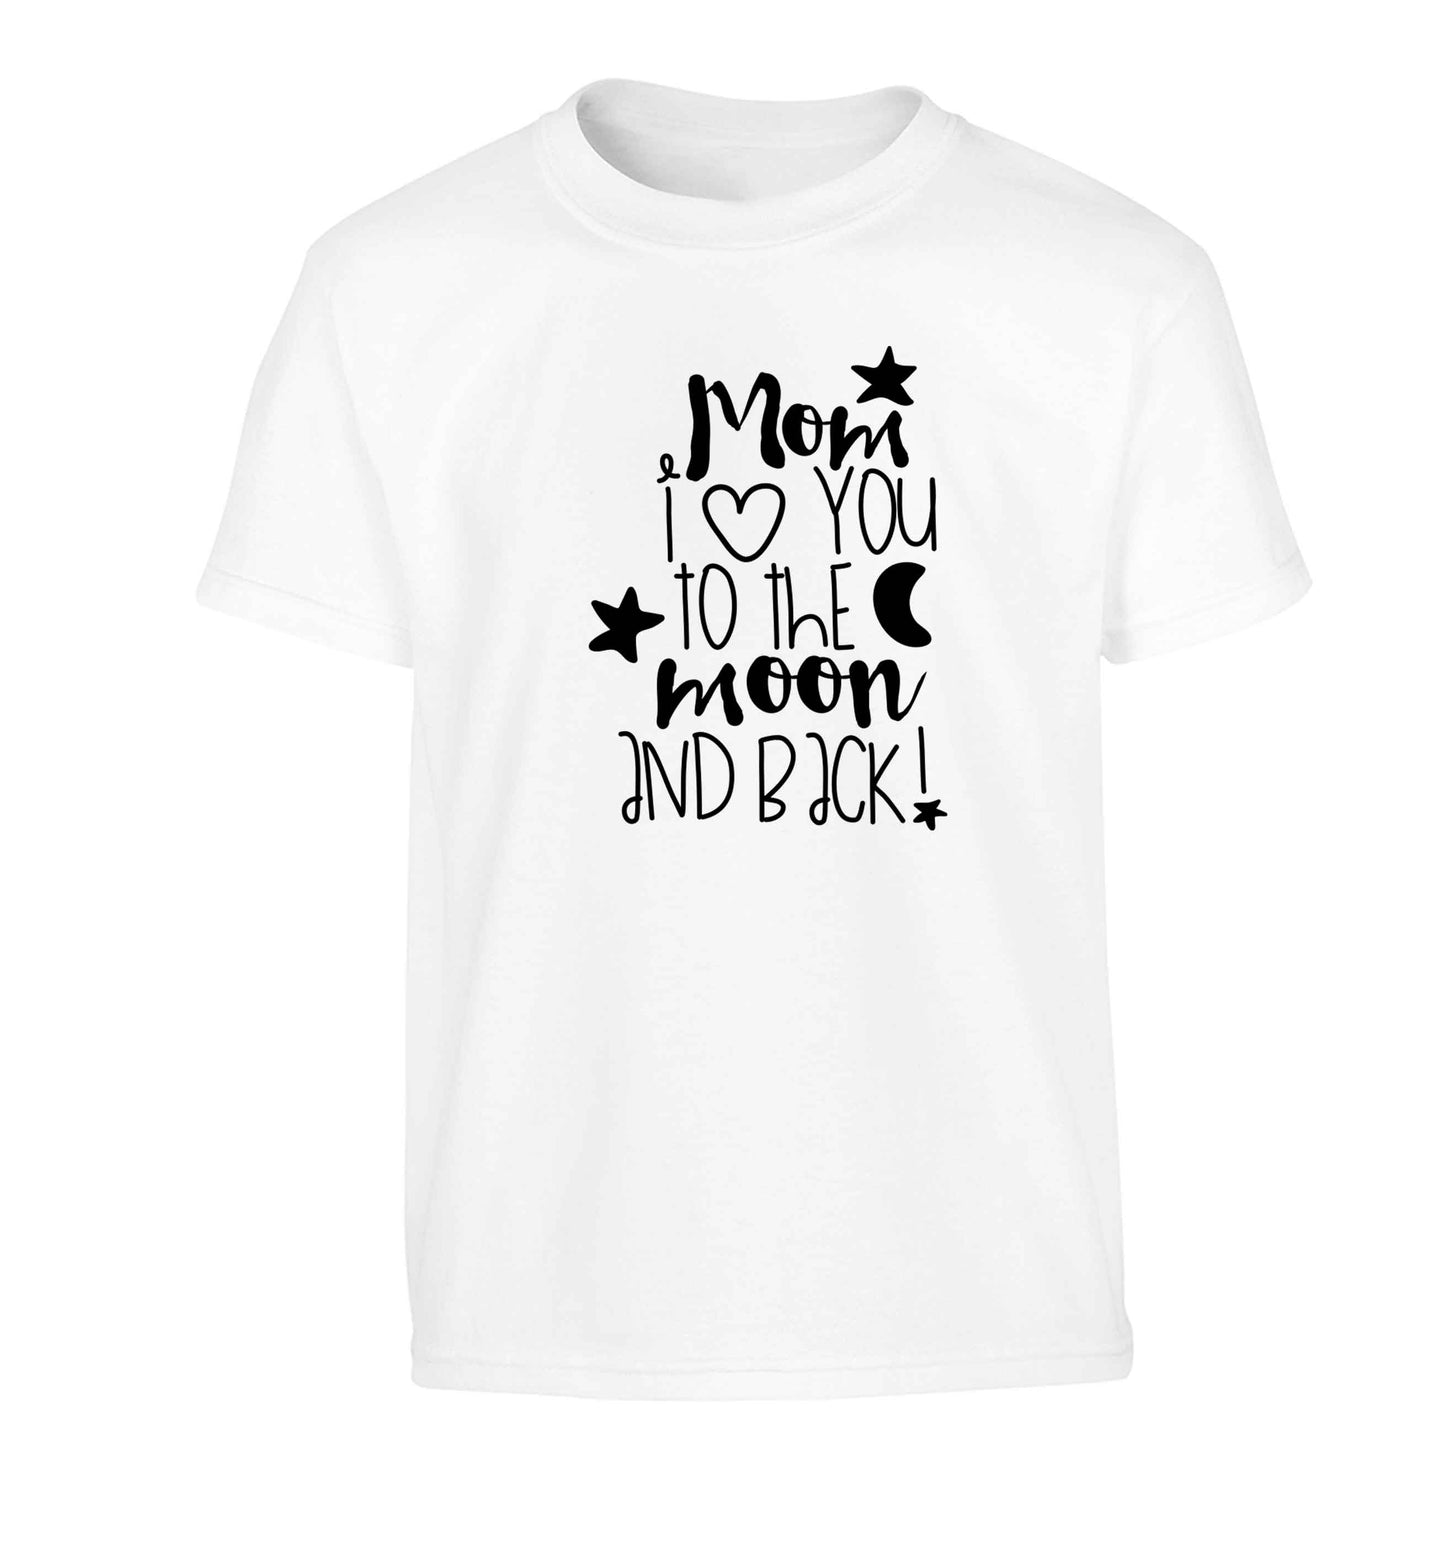 Mom I love you to the moon and back Children's white Tshirt 12-13 Years